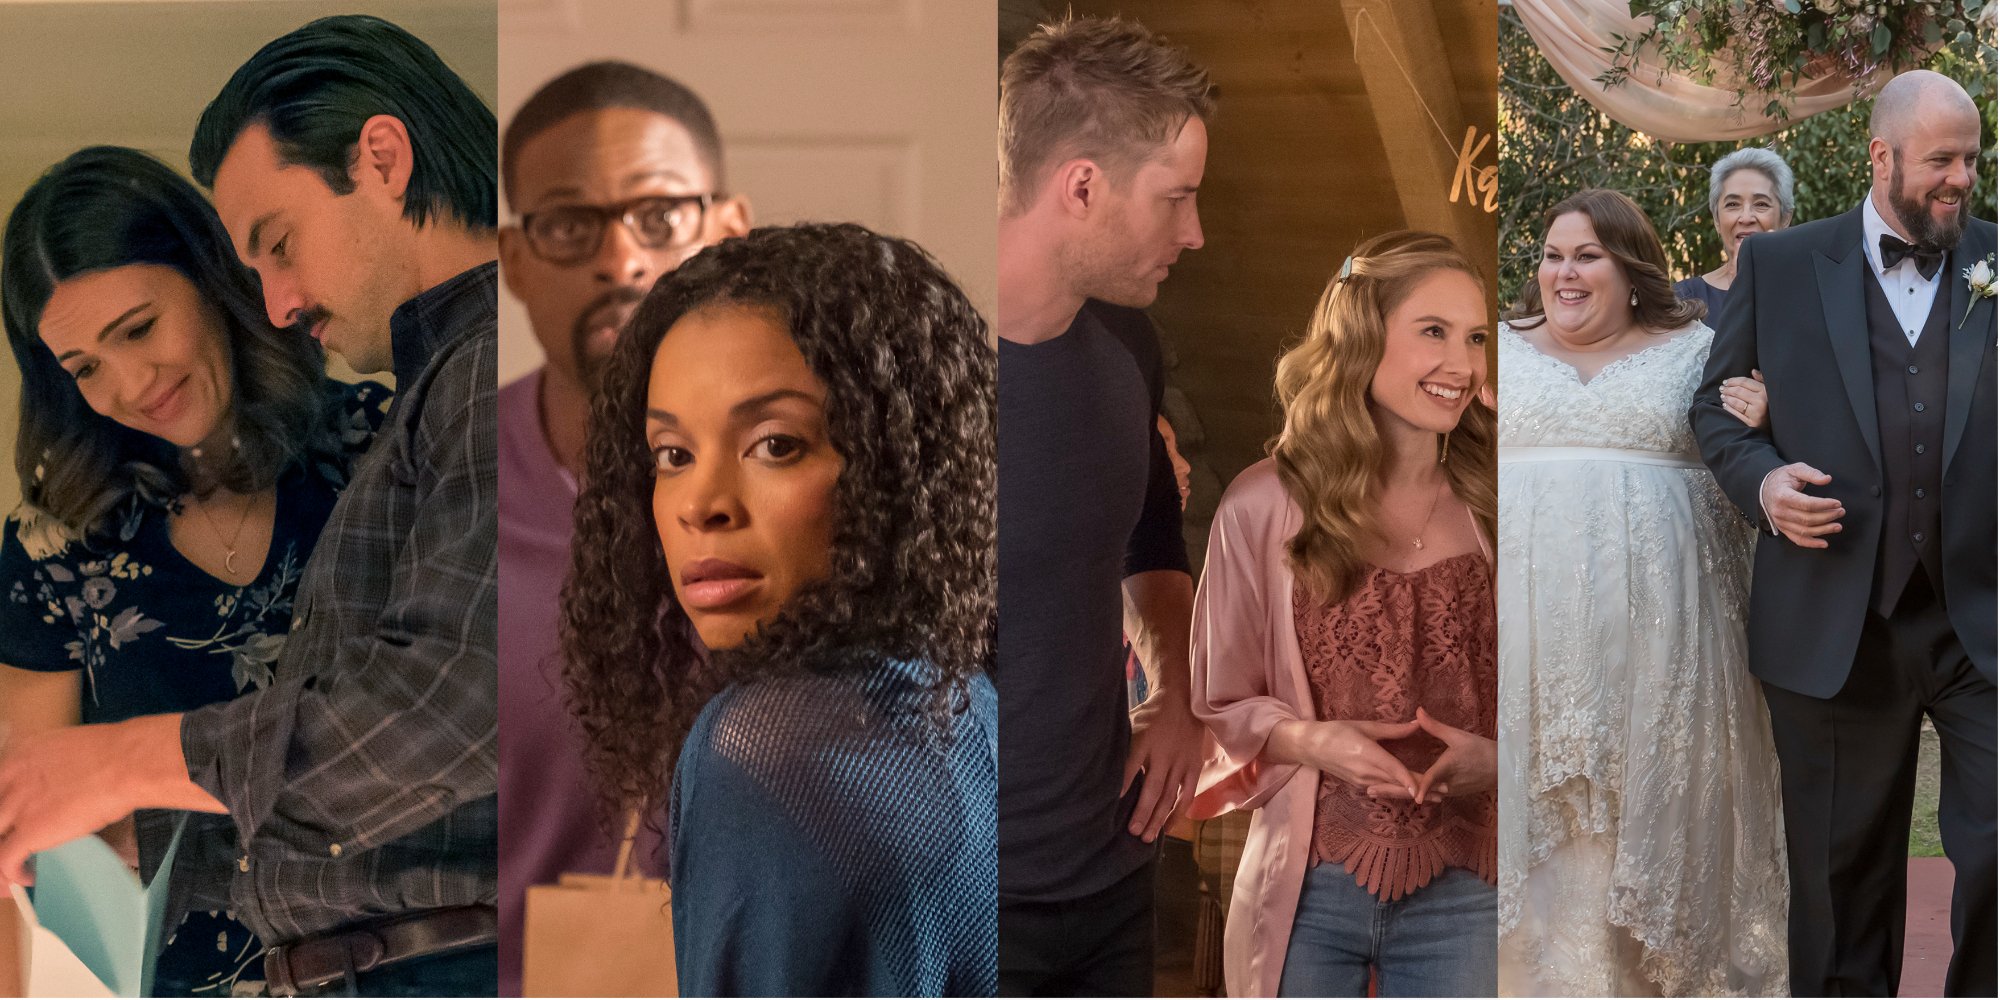 Fan predictions for the key storylines of 'This Is Us' included those involving characters Rebecca (Mandy Moore), Jack (Milo Ventimiglia), Randall (Sterling K. Brown) Beth (Susan Kelechi Watson), Kevin (Justin Hartley), Madison (Caitlin Thompson), Kate (Chrissy Metz) and Toby (Chris Sullivan).